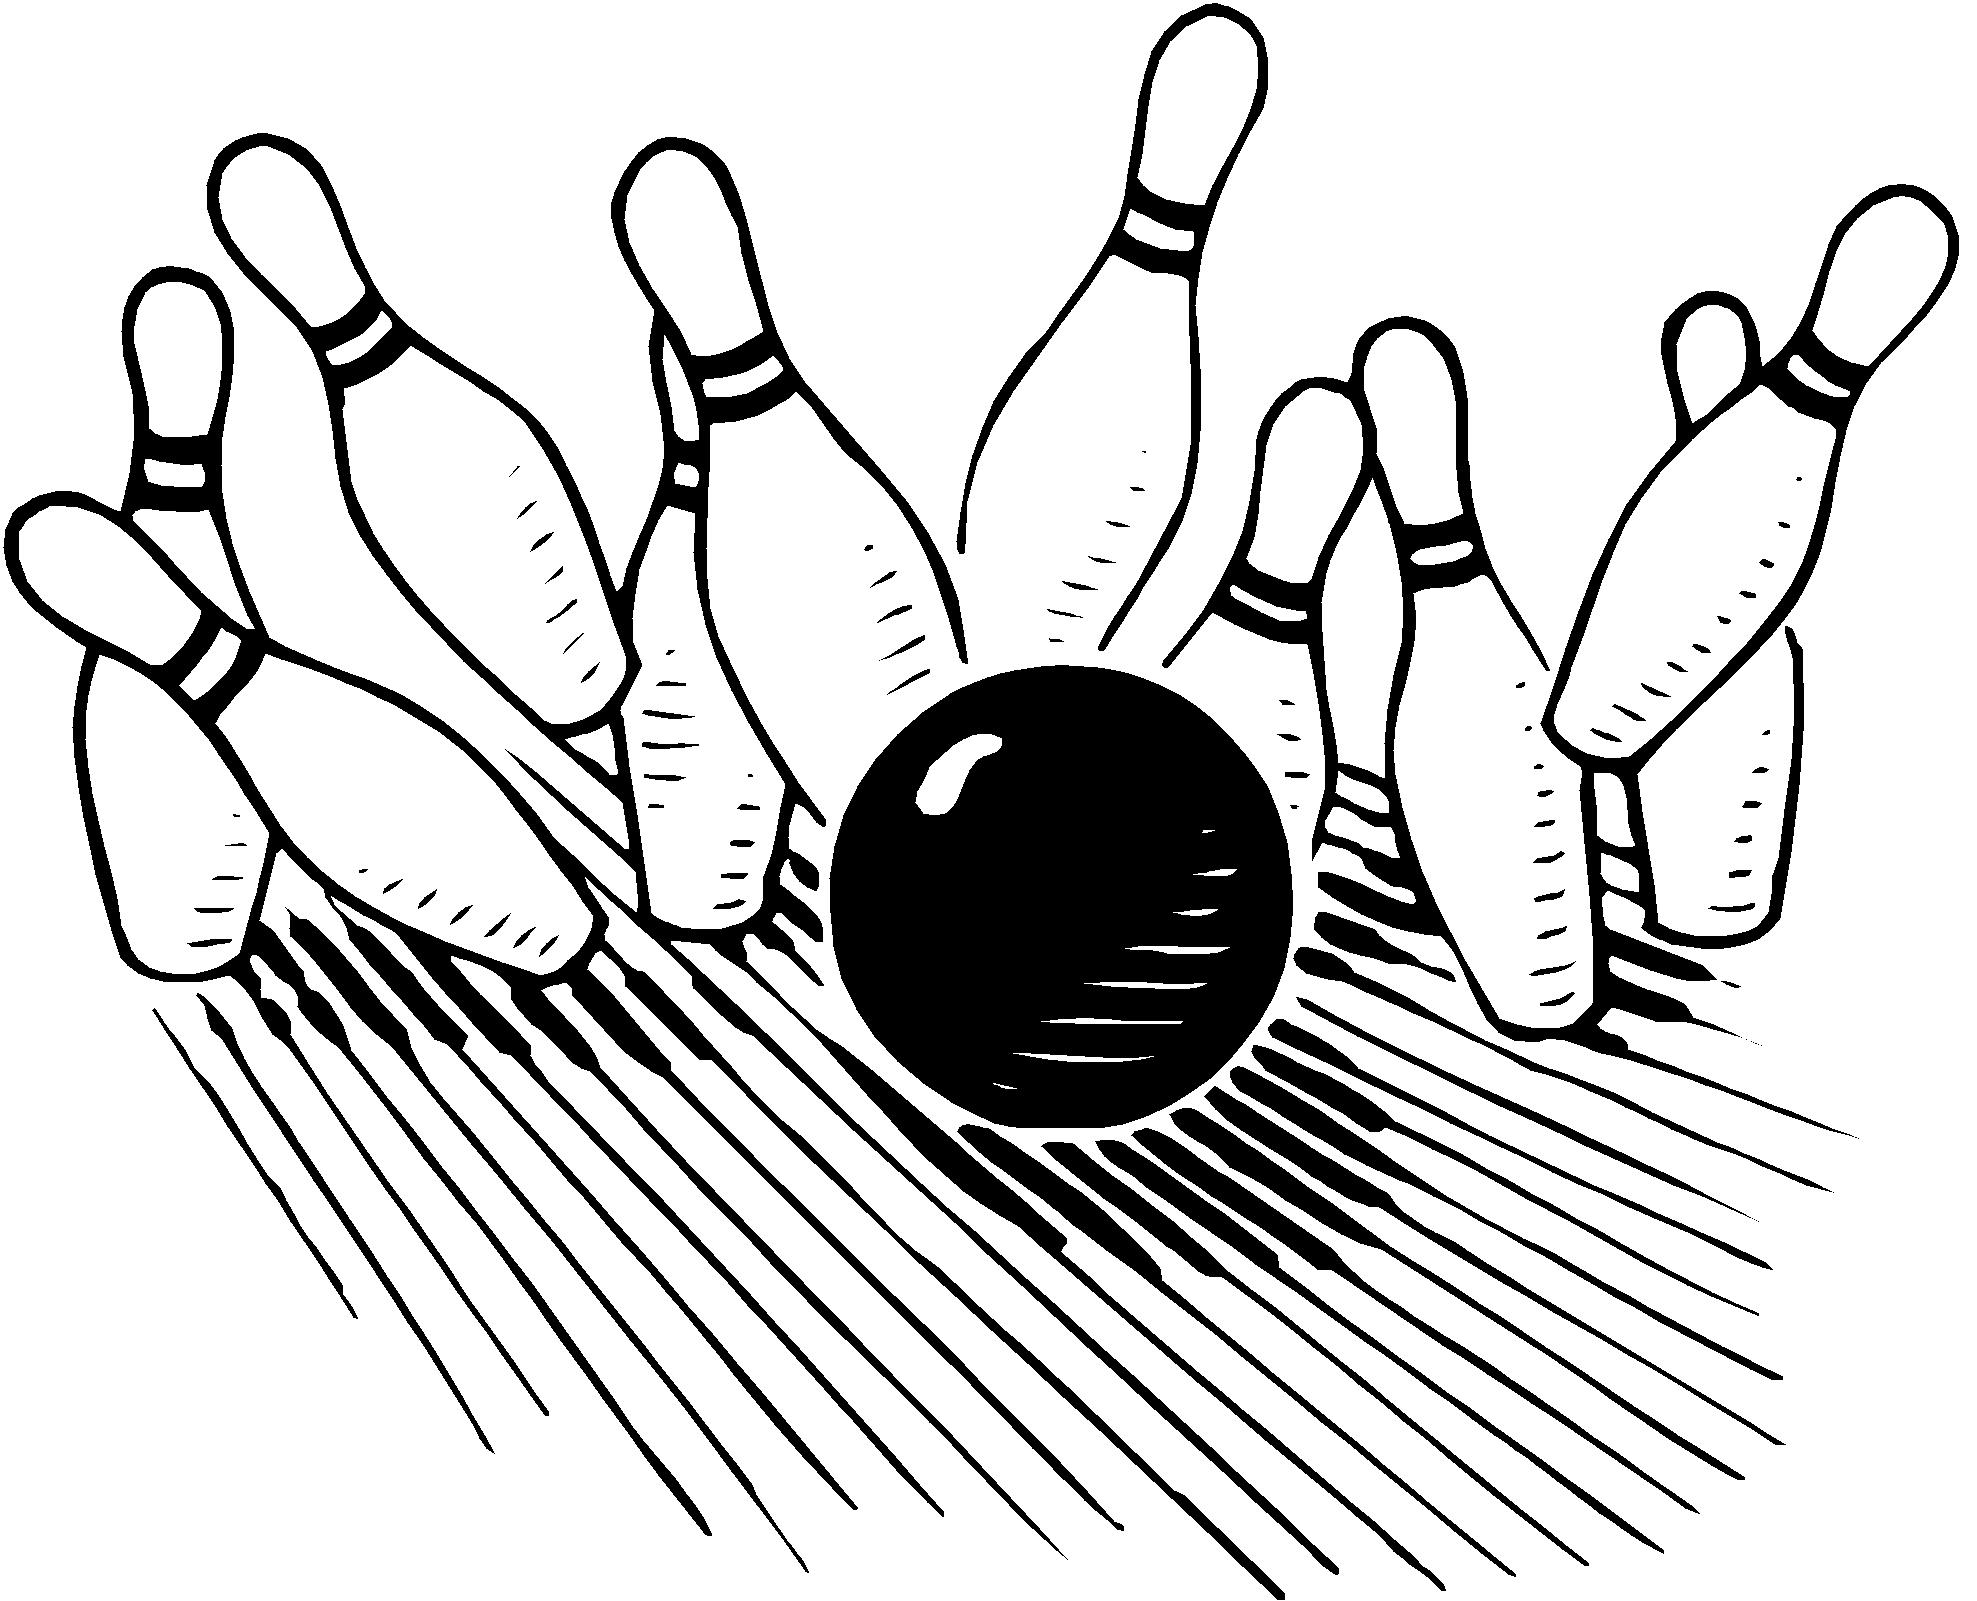 Free Clip Art Of Bowling - Clipart library